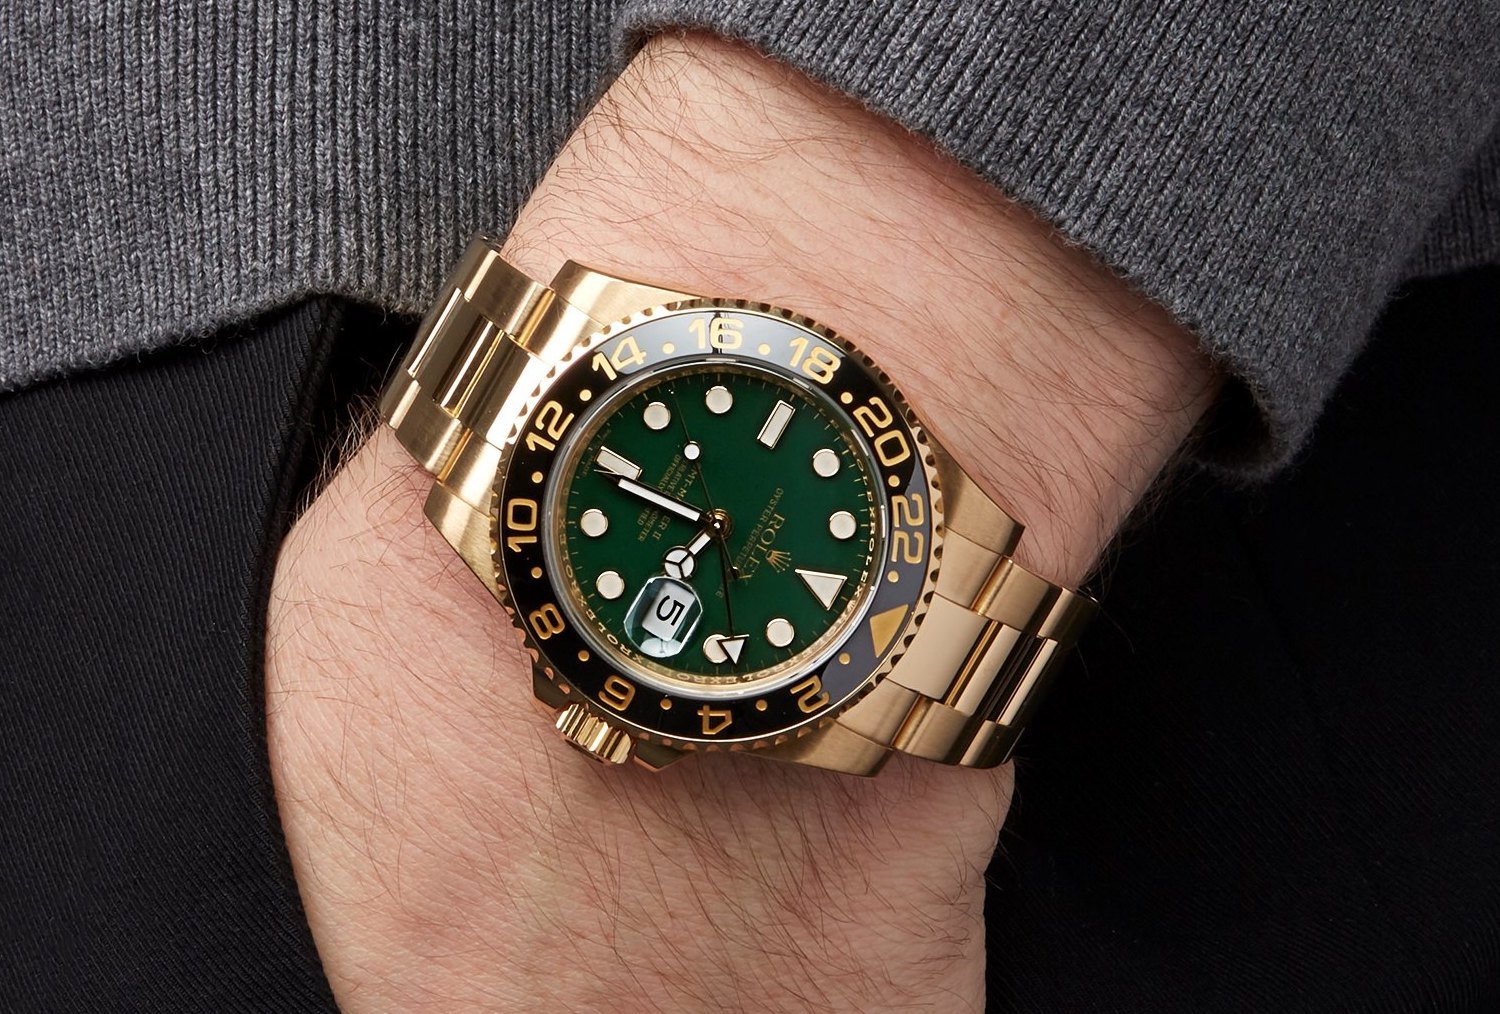 Rolex Submariner Date in stainless steel with a black ceramic bez